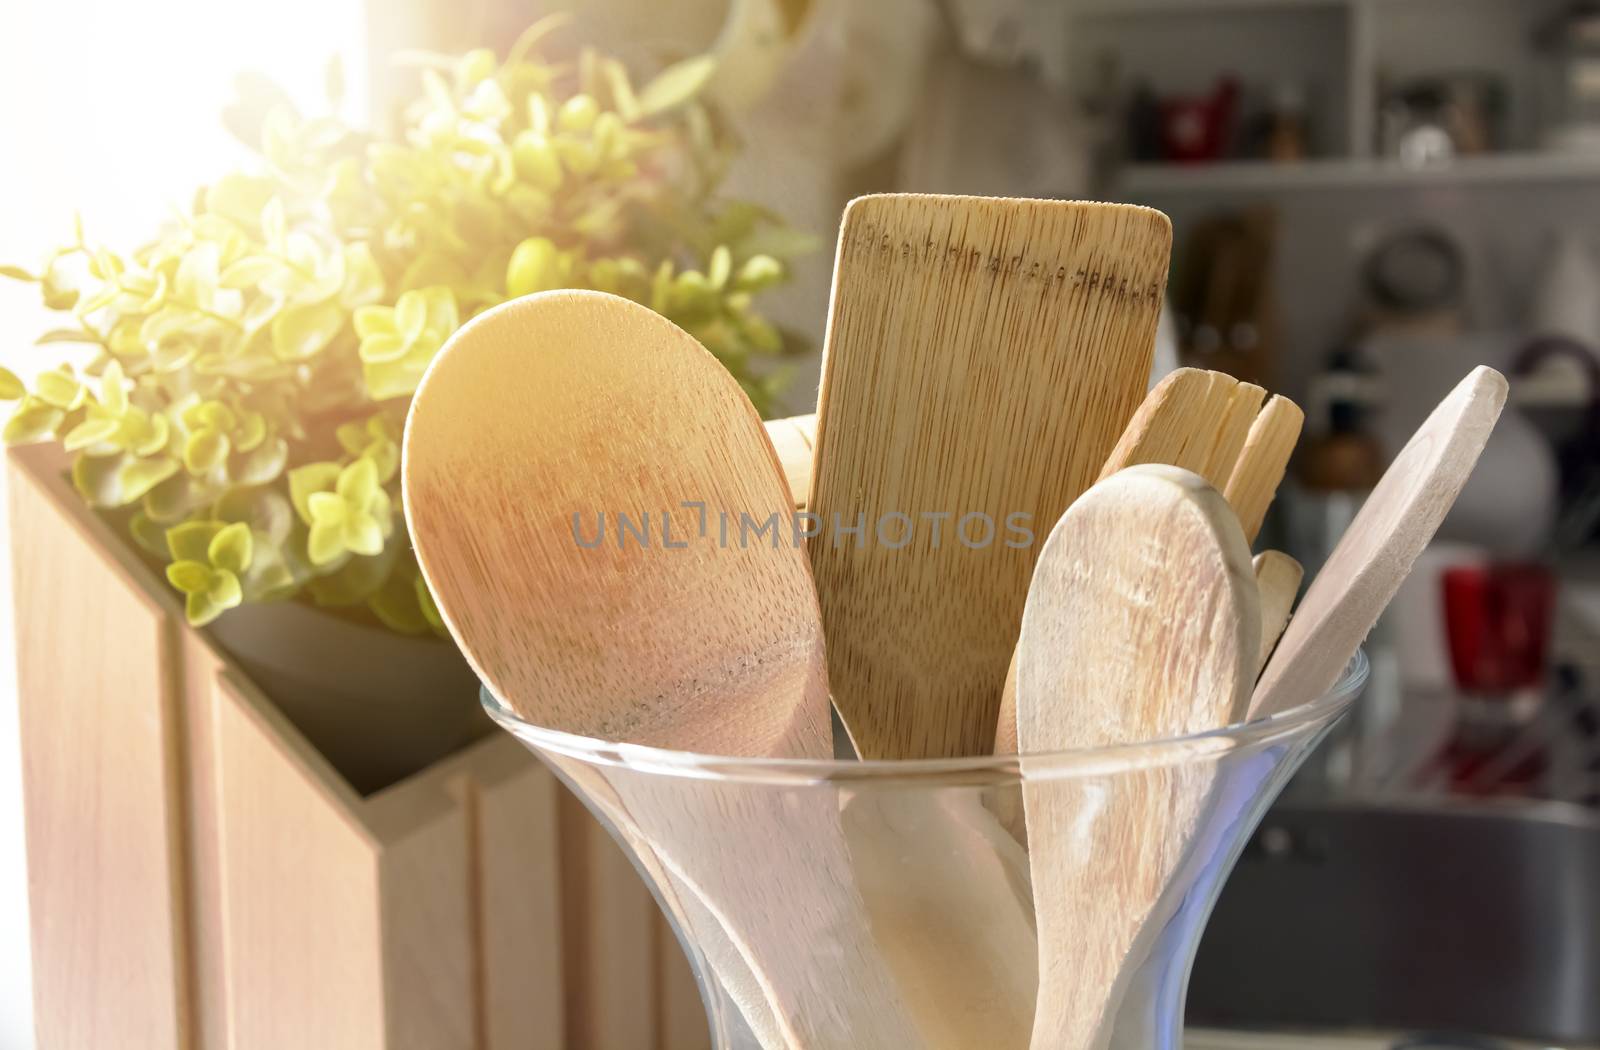 Close-up view of a group of wooden kitchen utensils inside a glass container. Cooking with traditional utensils